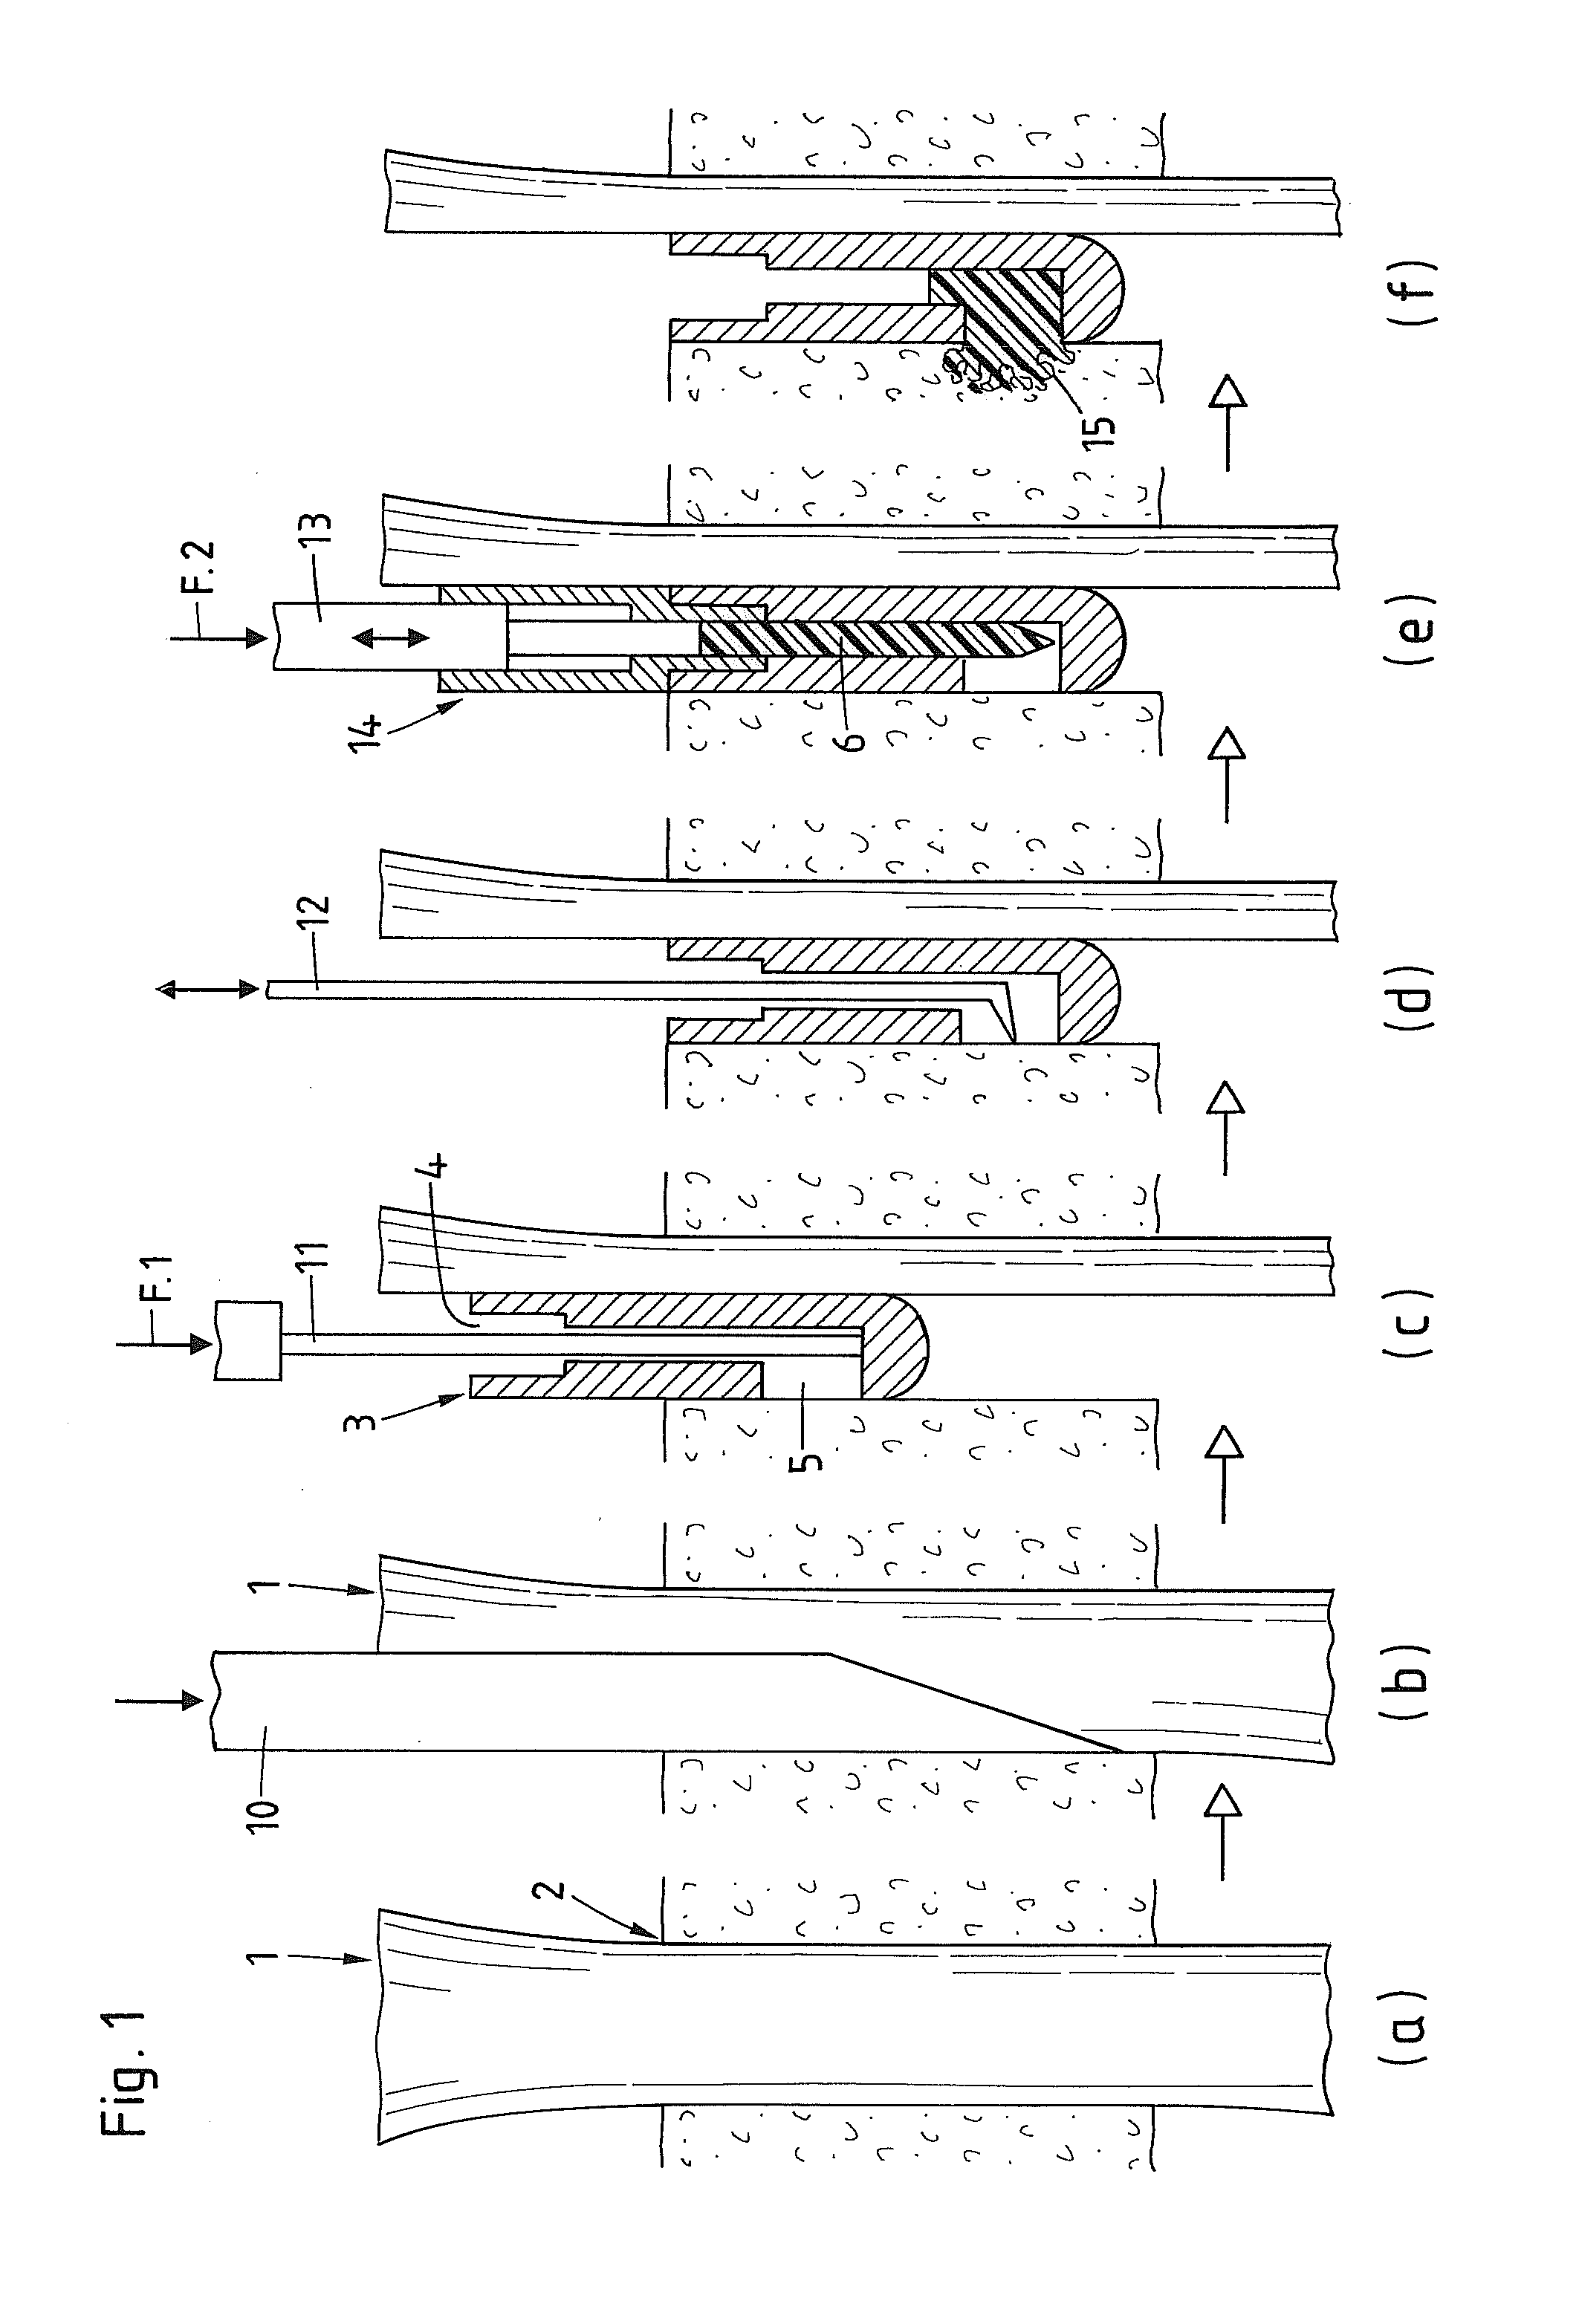 Method of fastening a tissue or a corresponding prosthetic element in an opening provided in a human or animal bone and fastener suitable for the method